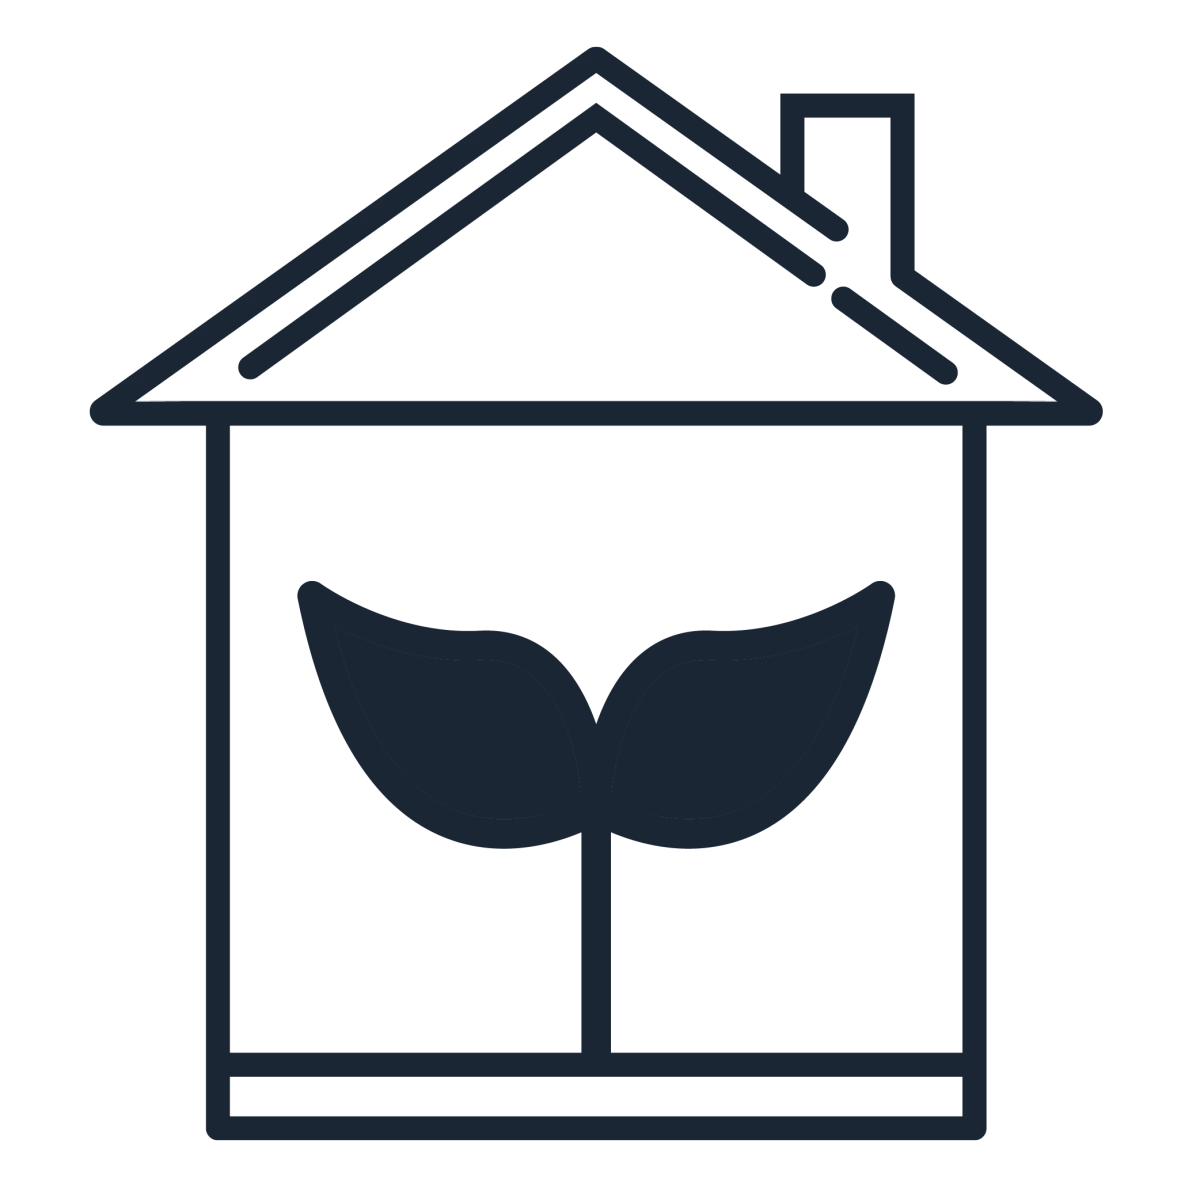 icon of a house with a plant growing inside